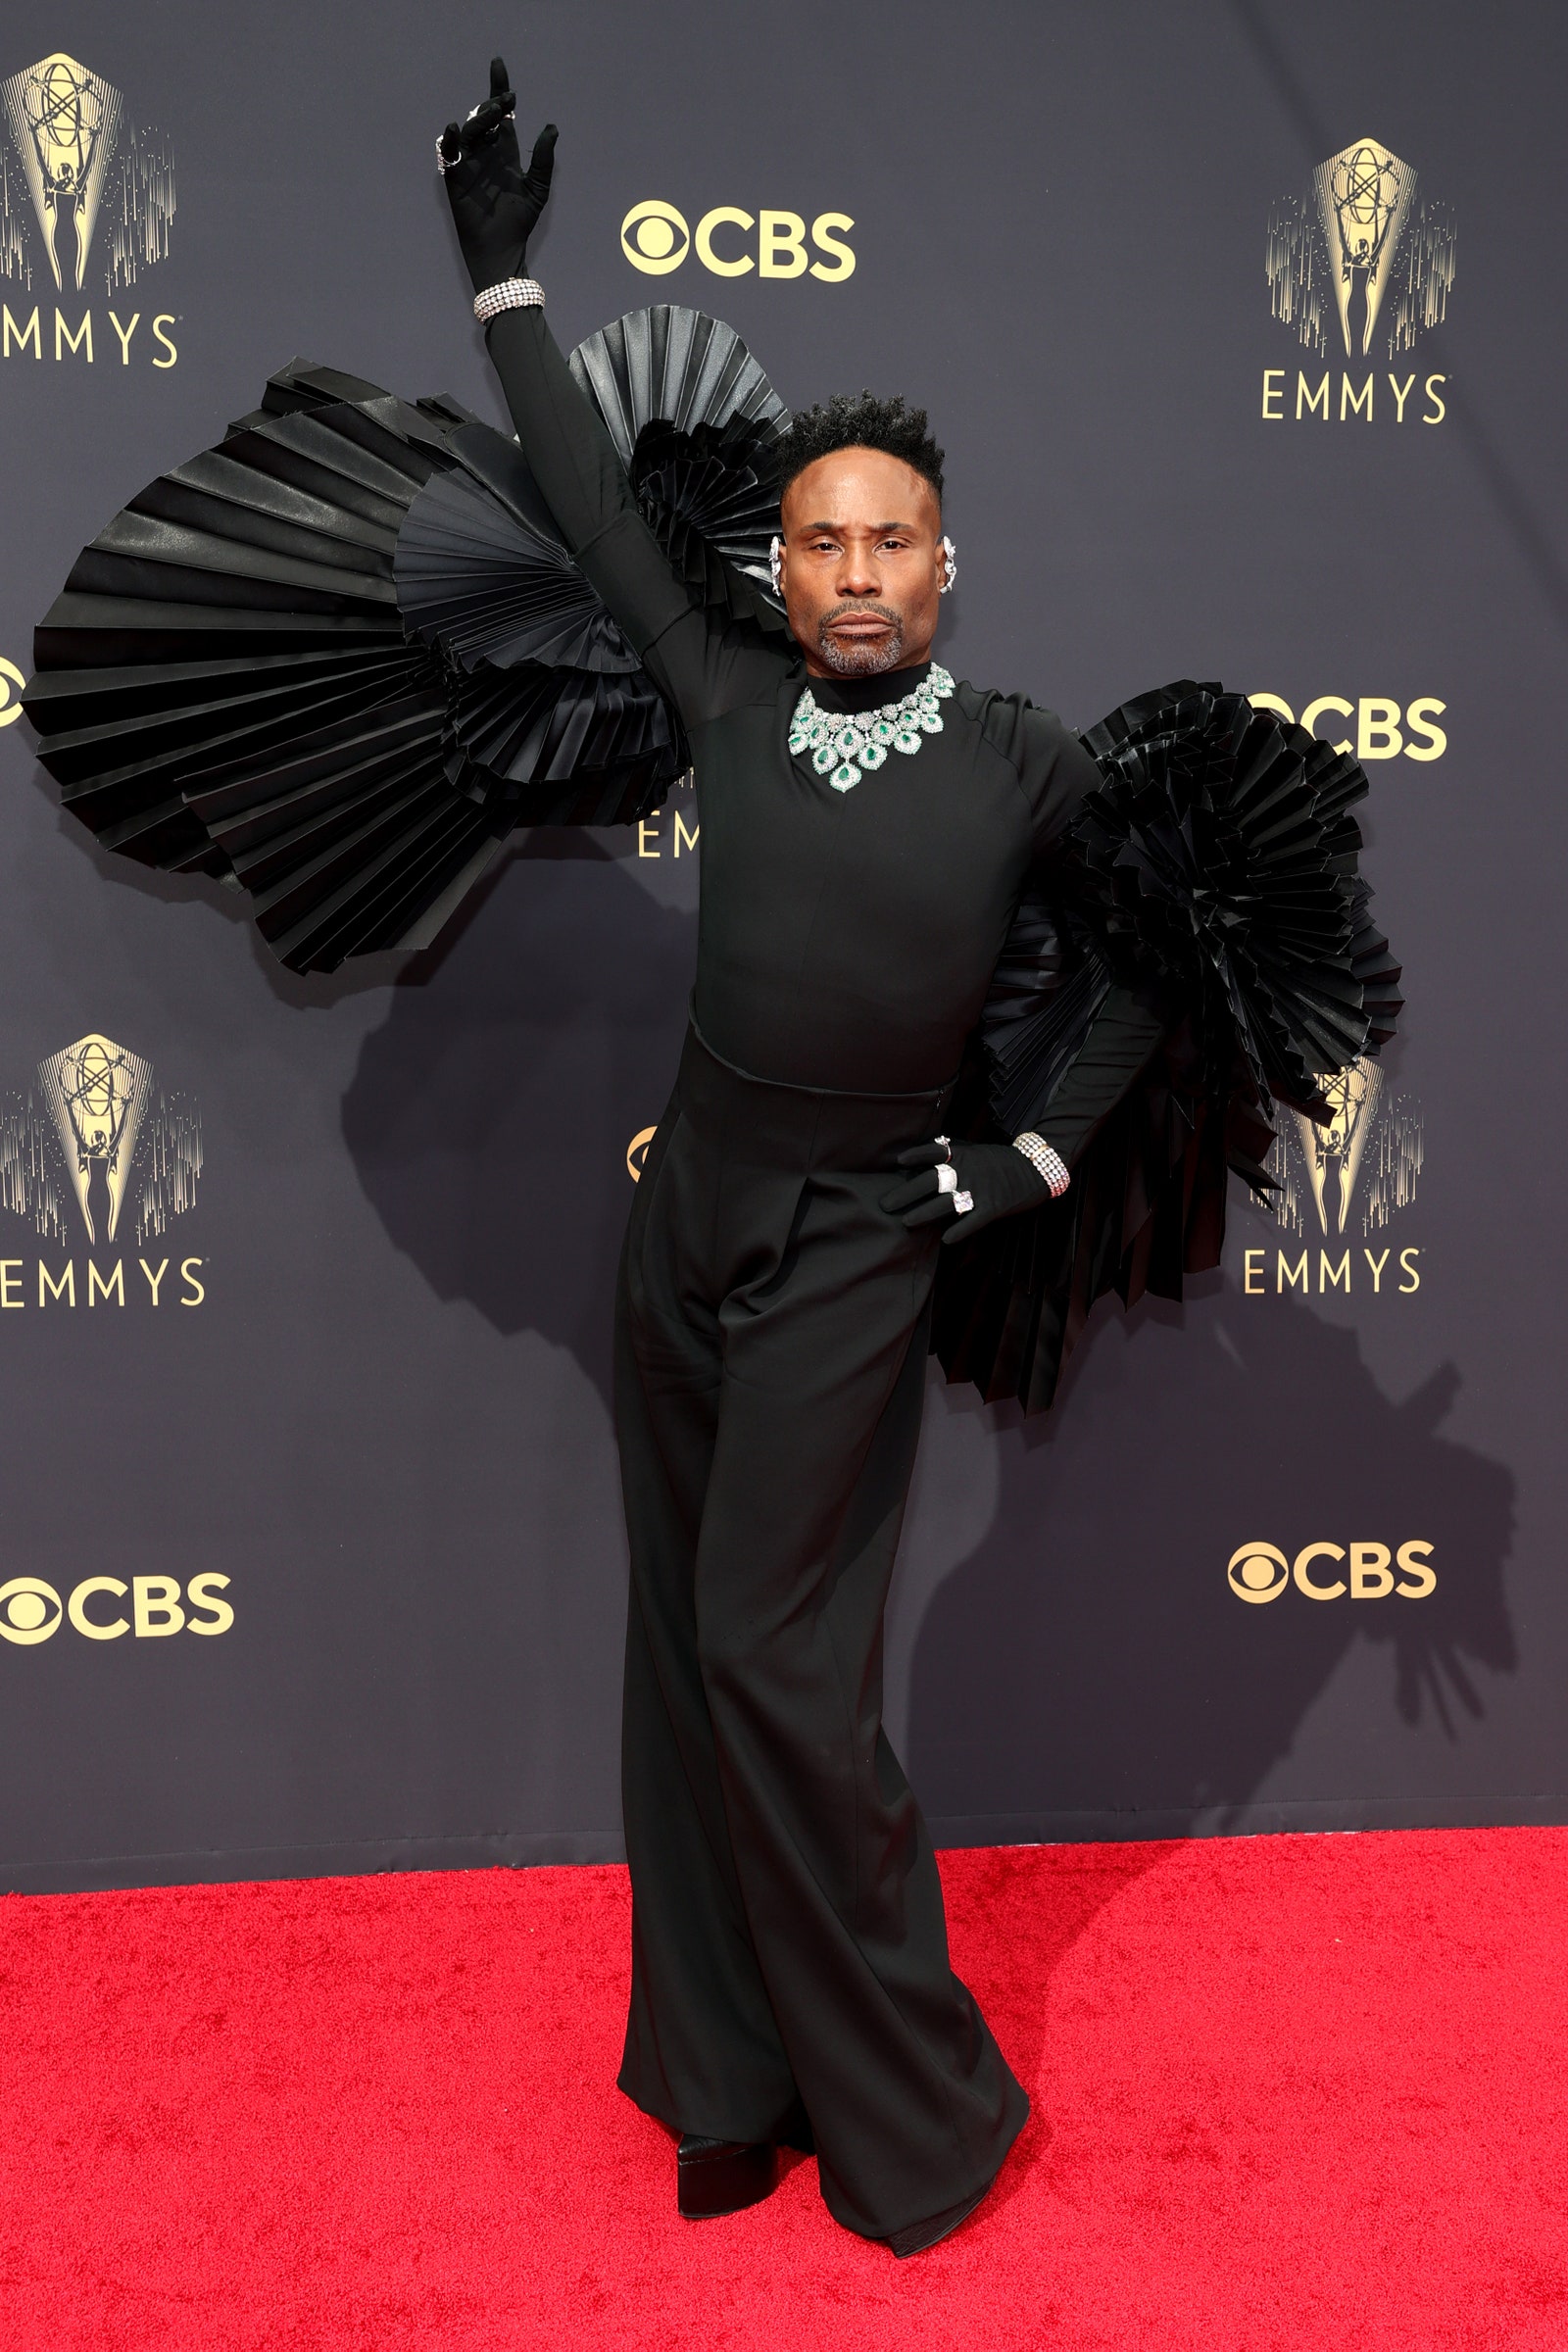 Billy Porter at the 2021 Emmys Awards